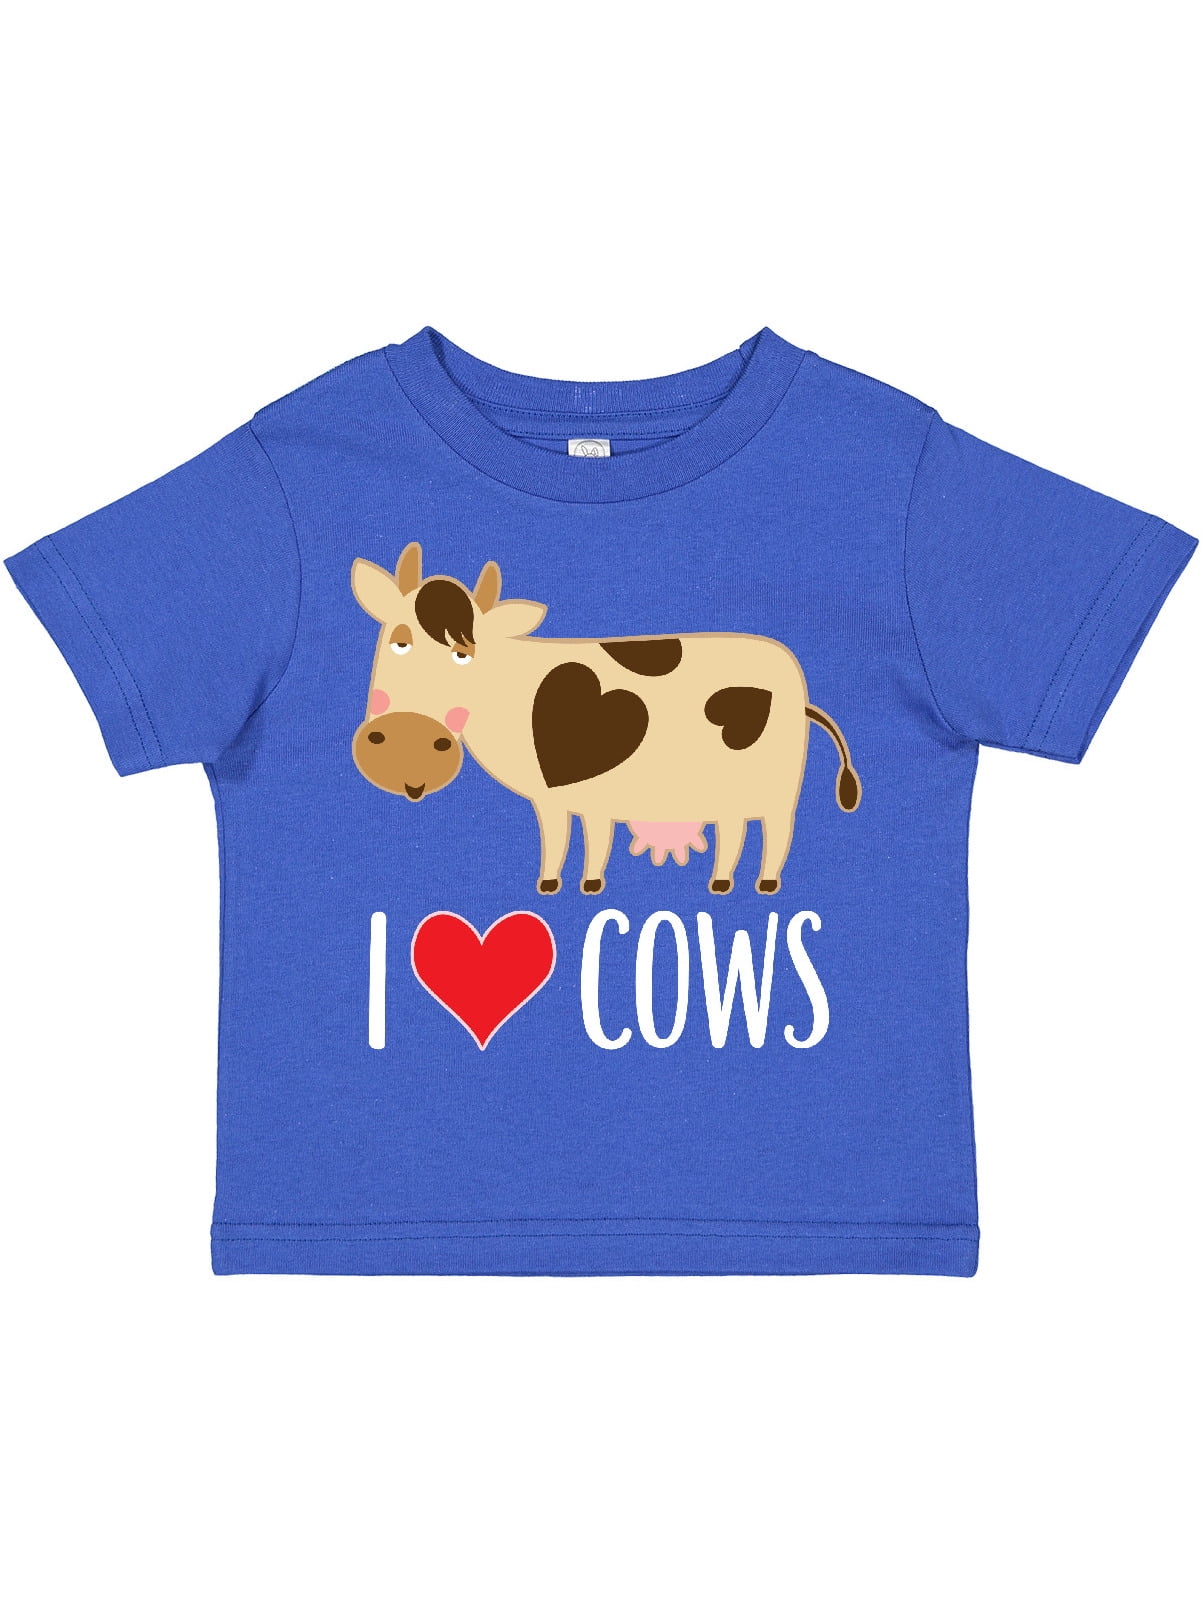 Just Like My Papa Im Going to Love Cows When I Grow Up Toddler/Kids Ruffle T-Shirt 